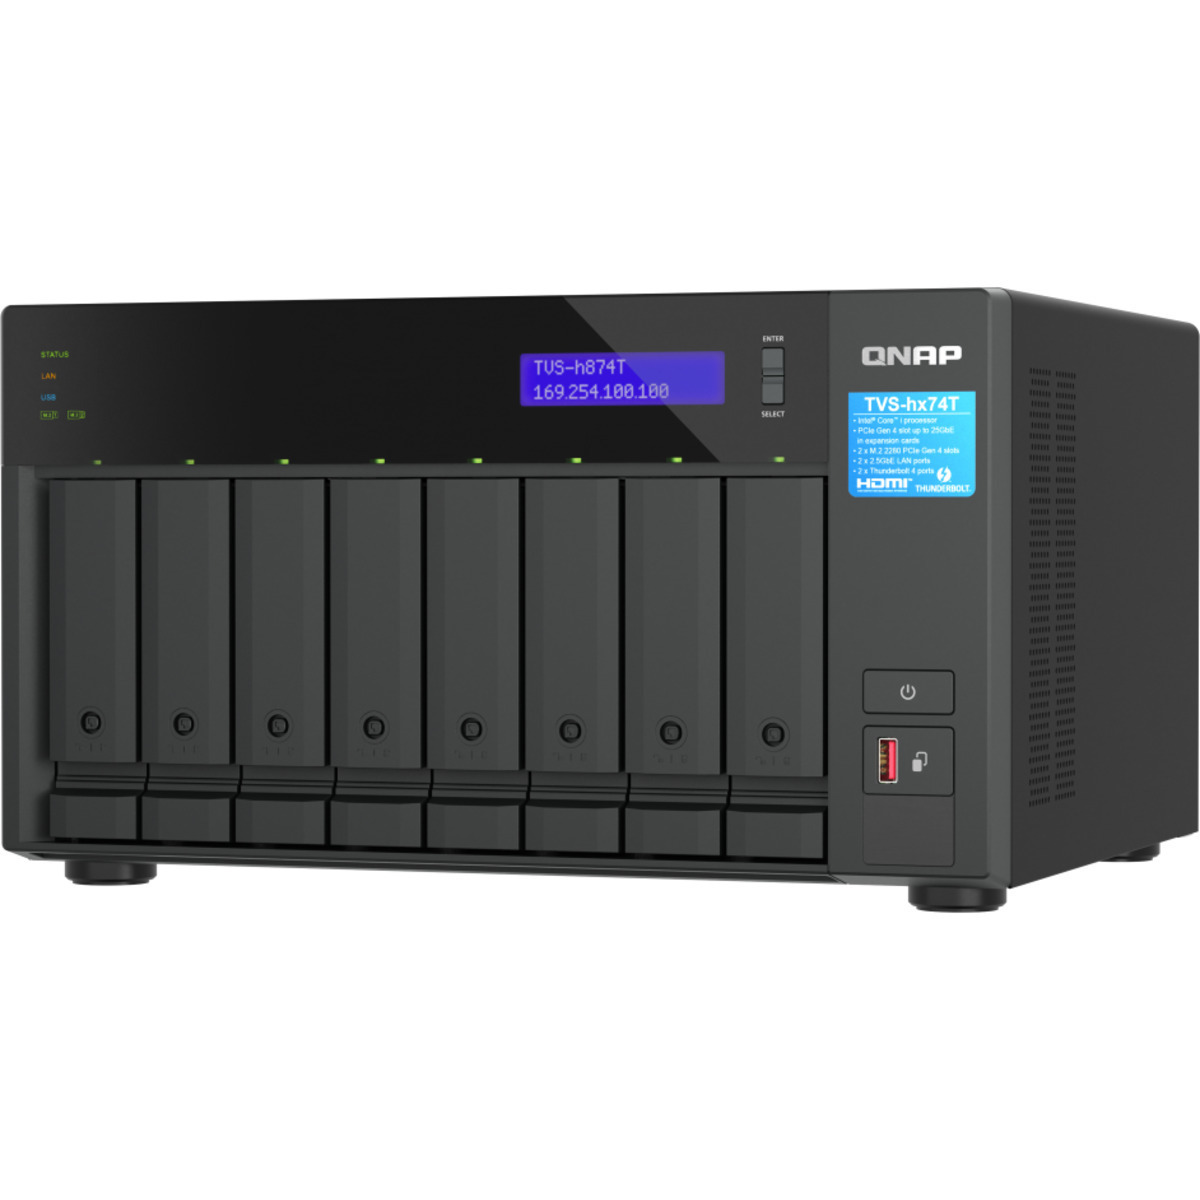 buy QNAP TVS-h874T Core i7 Thunderbolt 4 176tb Desktop DAS-NAS - Combo Direct + Network Storage Device 8x22000gb Seagate IronWolf Pro ST22000NT001 3.5 7200rpm SATA 6Gb/s HDD NAS Class Drives Installed - Burn-In Tested - nas headquarters buy network attached storage server device das new raid-5 free shipping usa spring sale TVS-h874T Core i7 Thunderbolt 4